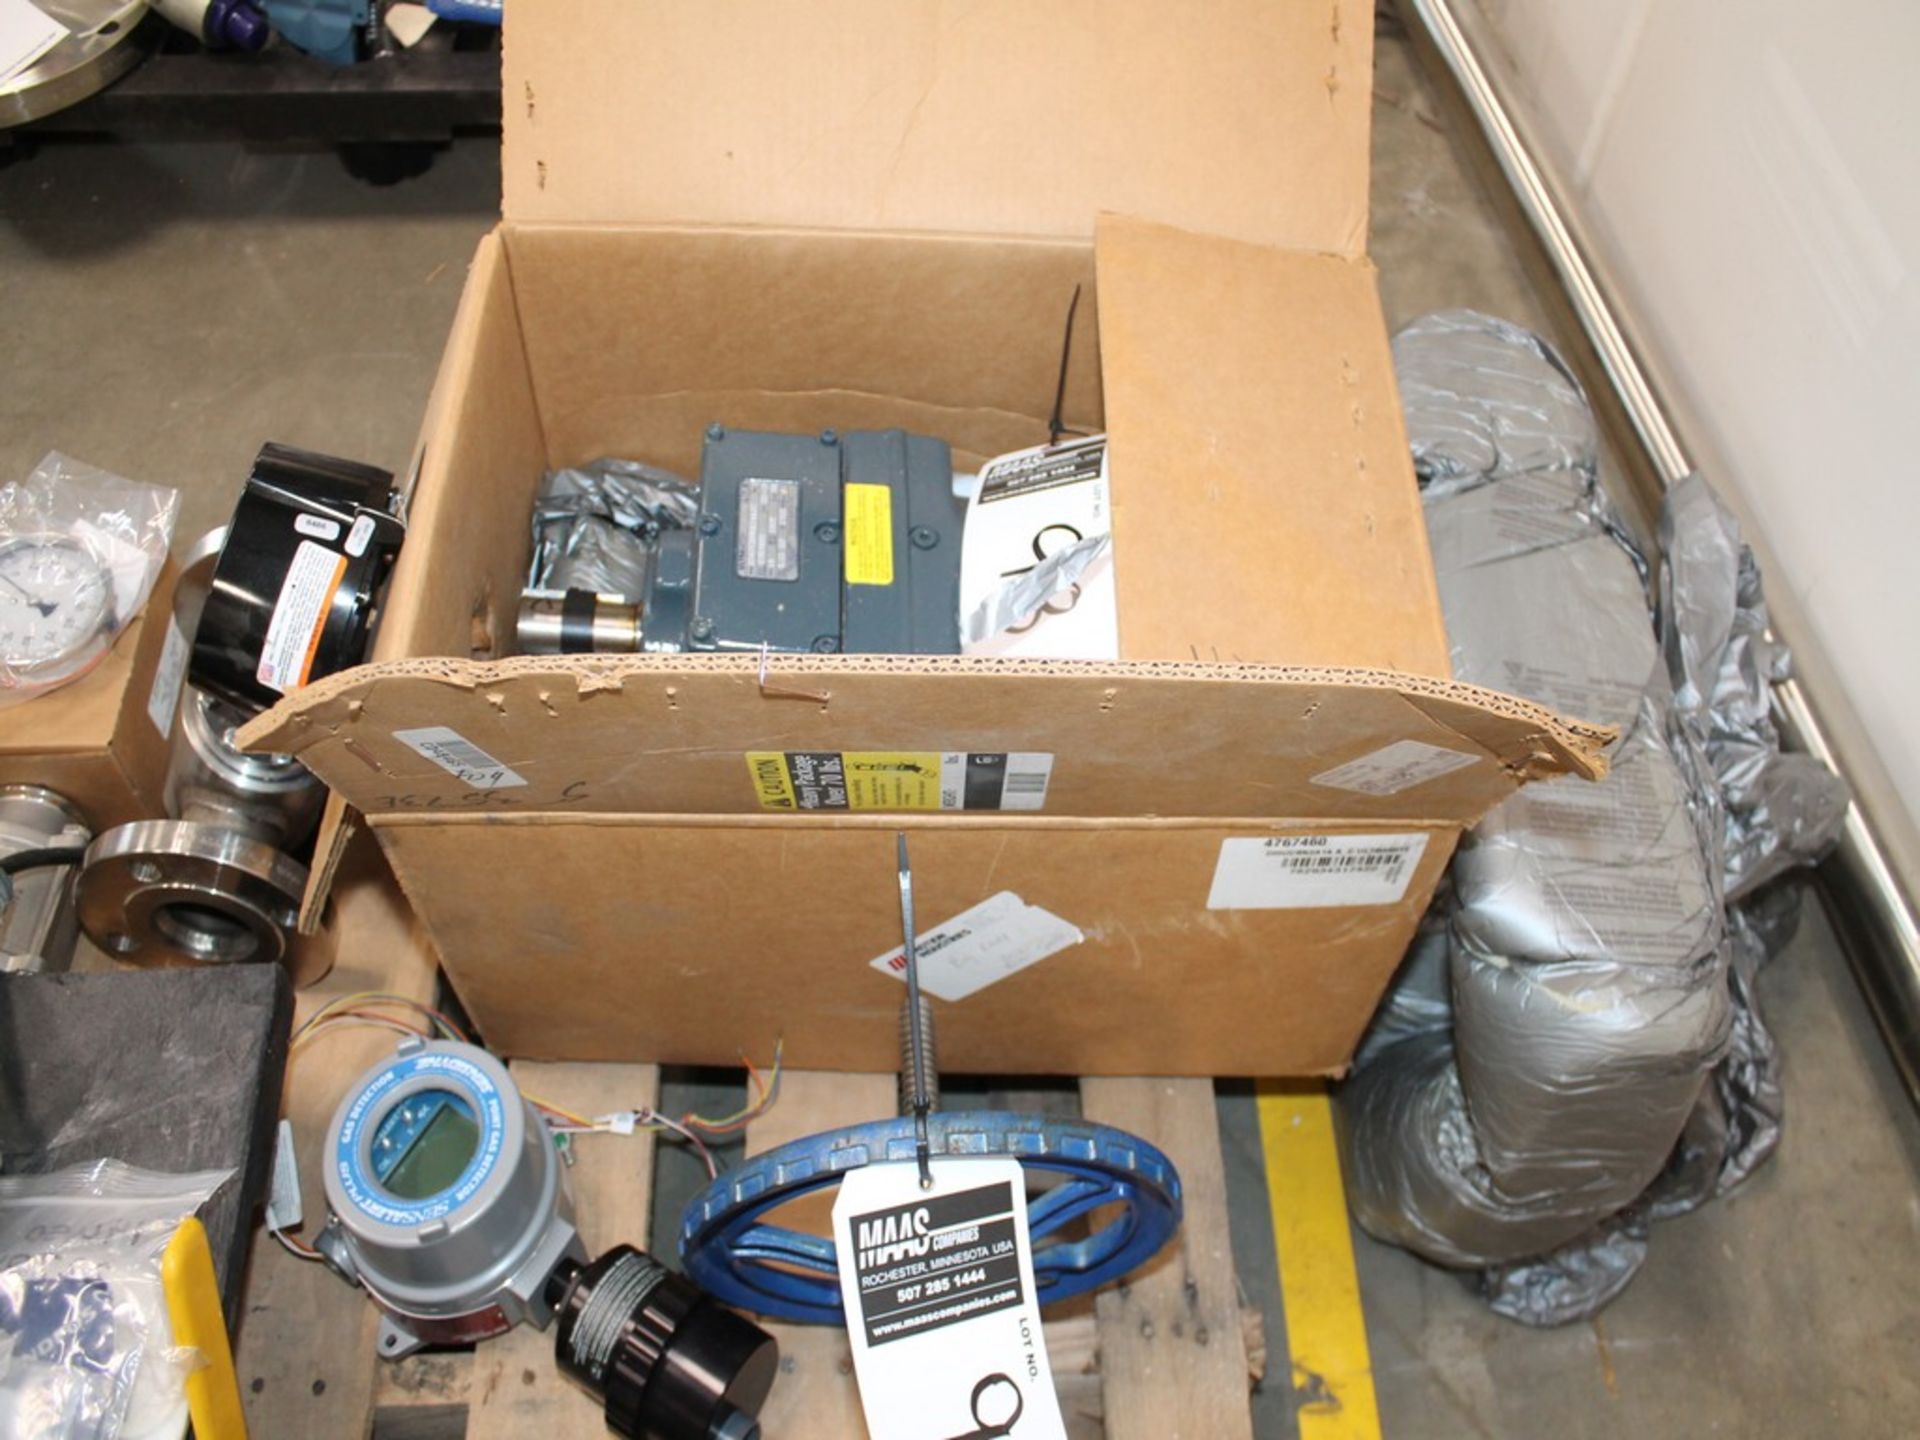 LOT CONTENTS OF PALLET WITH MISCELLANEOUS PUMPS, GAUGES, VALVES, METERS - Image 9 of 12